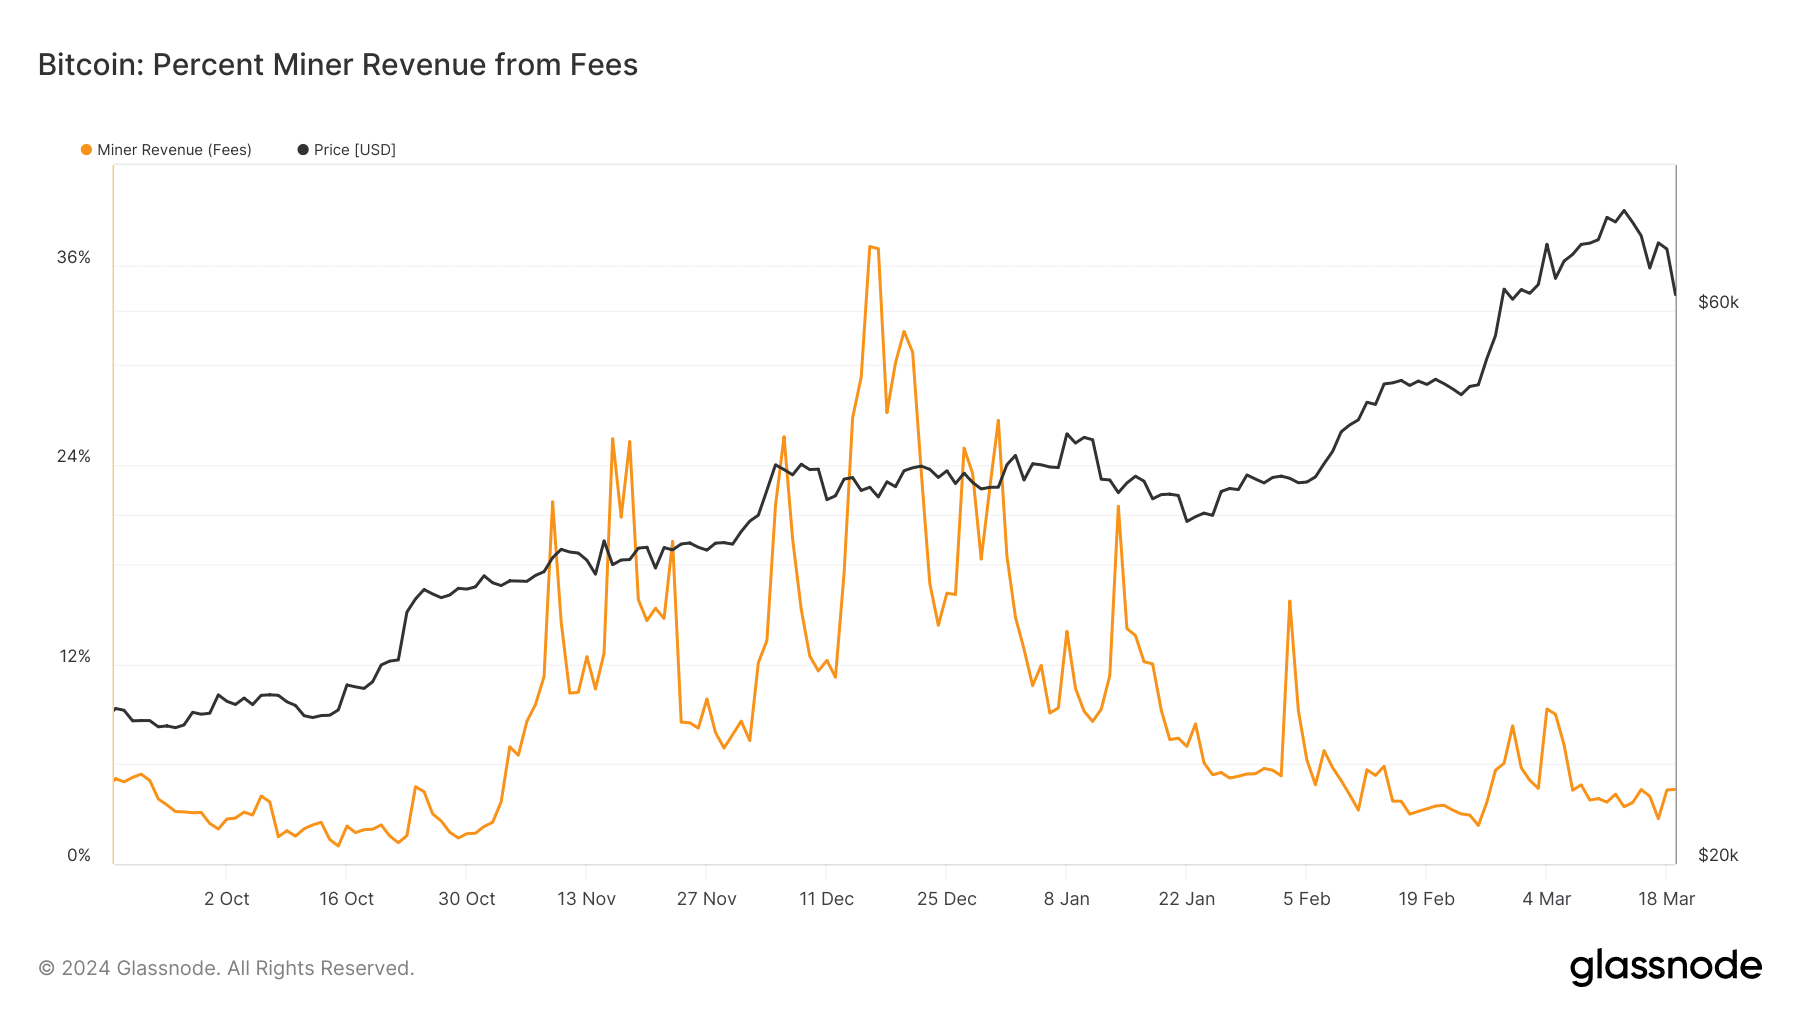 Costs for Bitcoin miners are falling